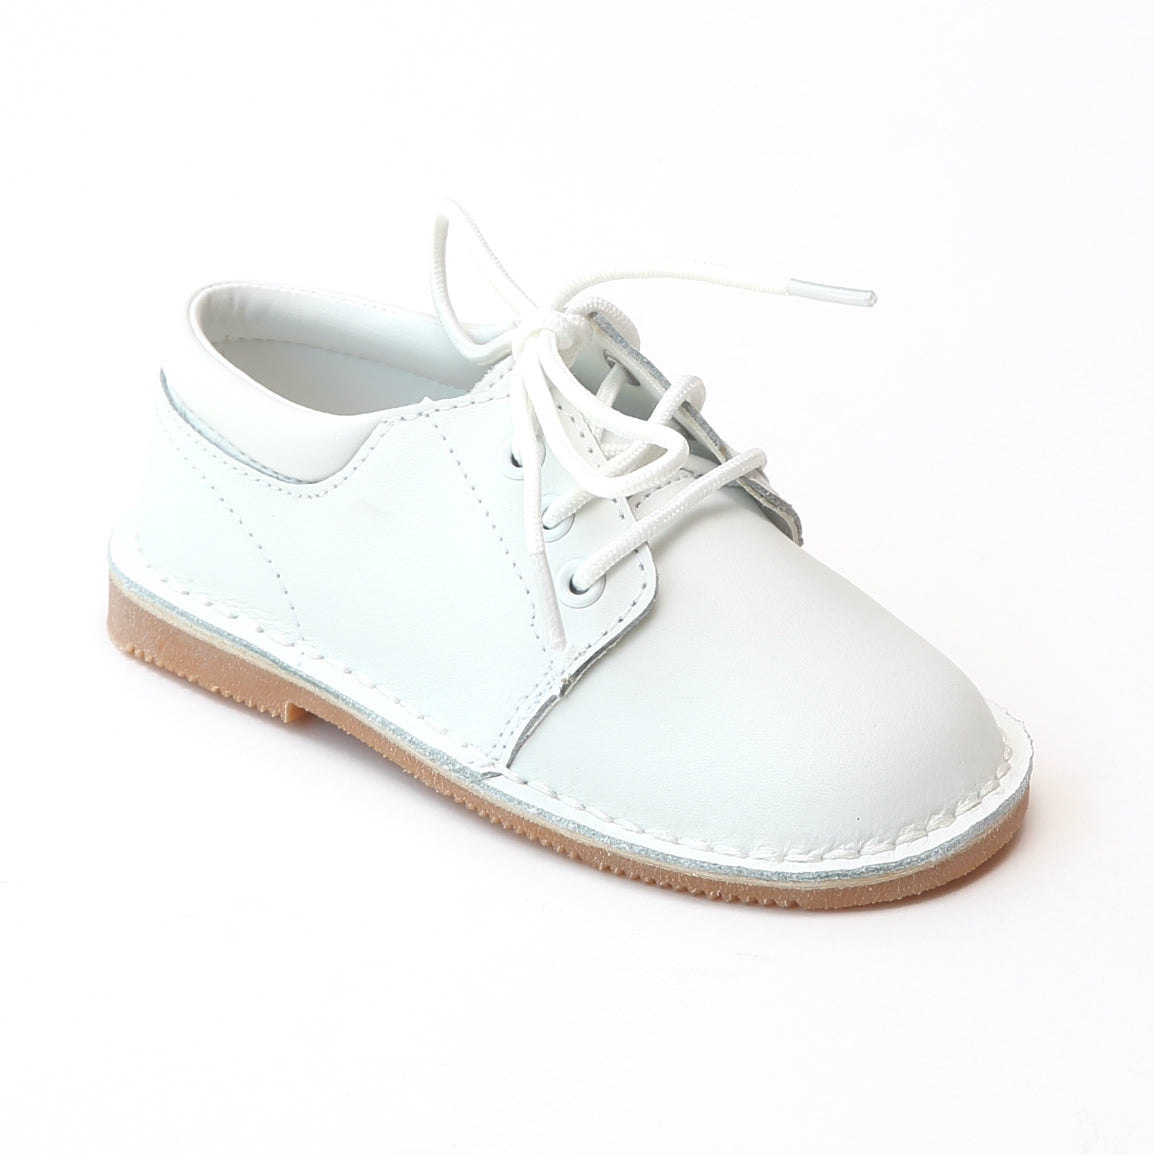 L'Amour Shoes Boys 5012 Classic White Leather Lace Up Oxfords Shoes ...